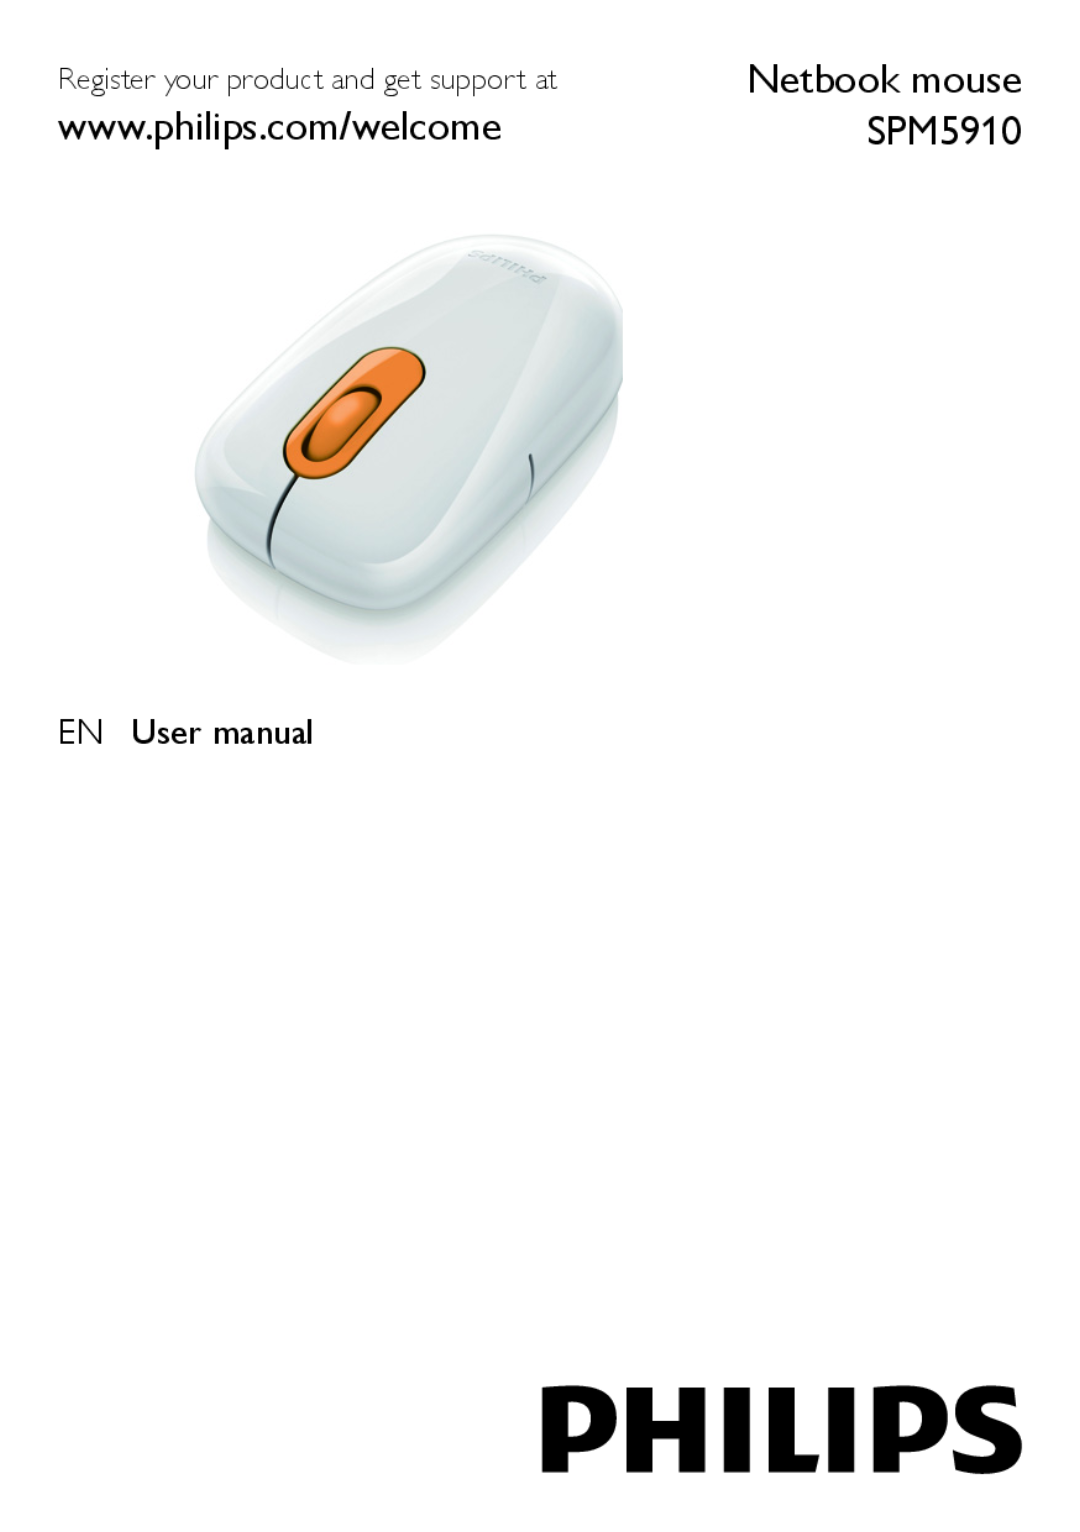 Philips SPM5910 user manual Netbook mouse, Register your product and get support at 